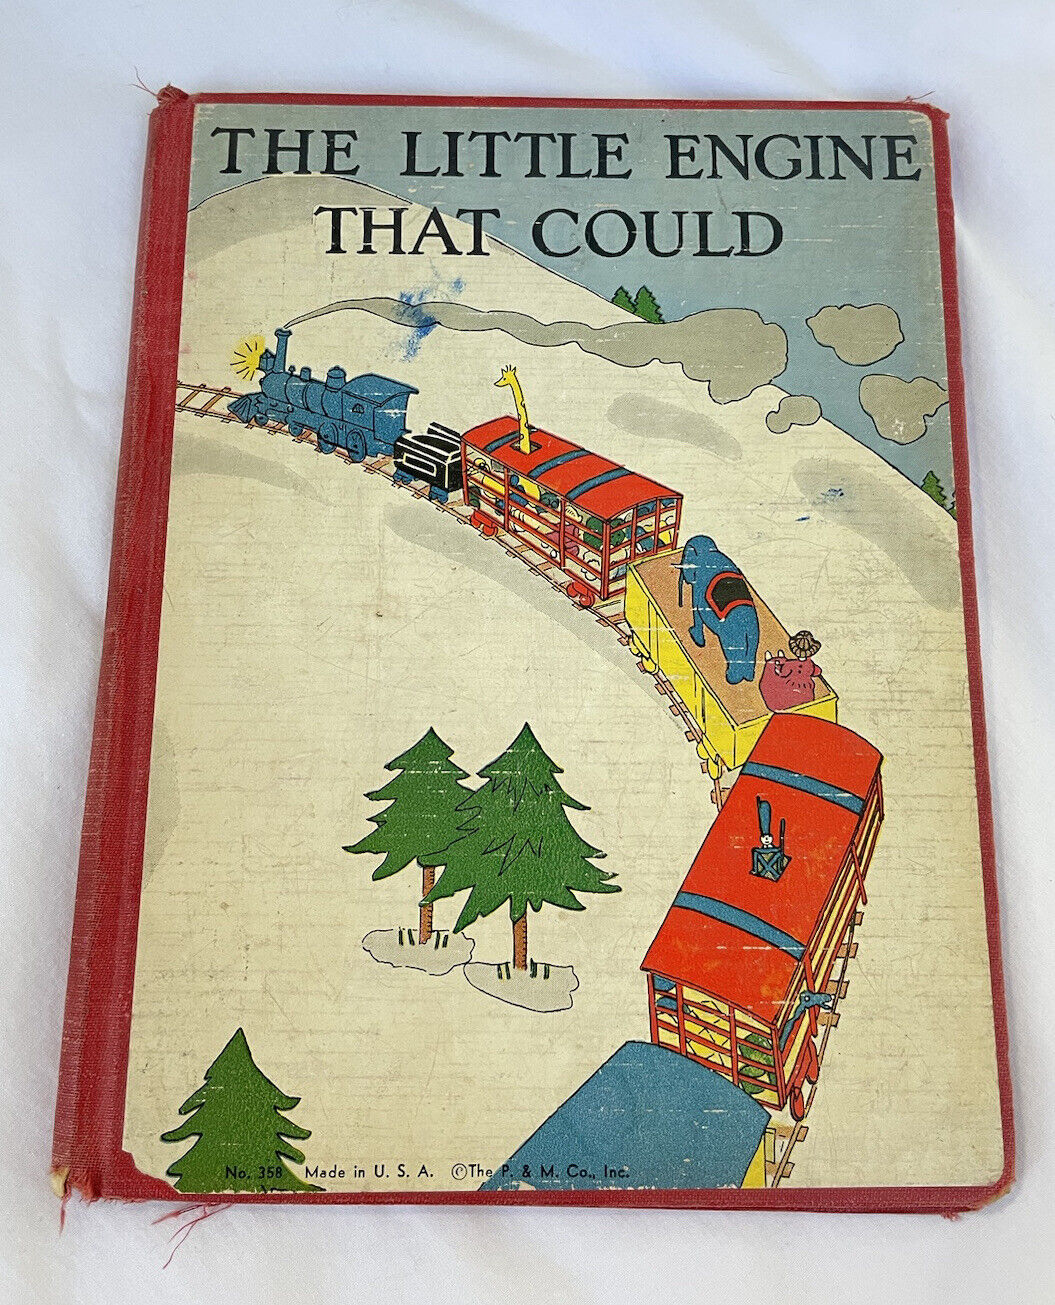 Antique The Little Engine That Could Vintage Book - Watty Piper (1930)